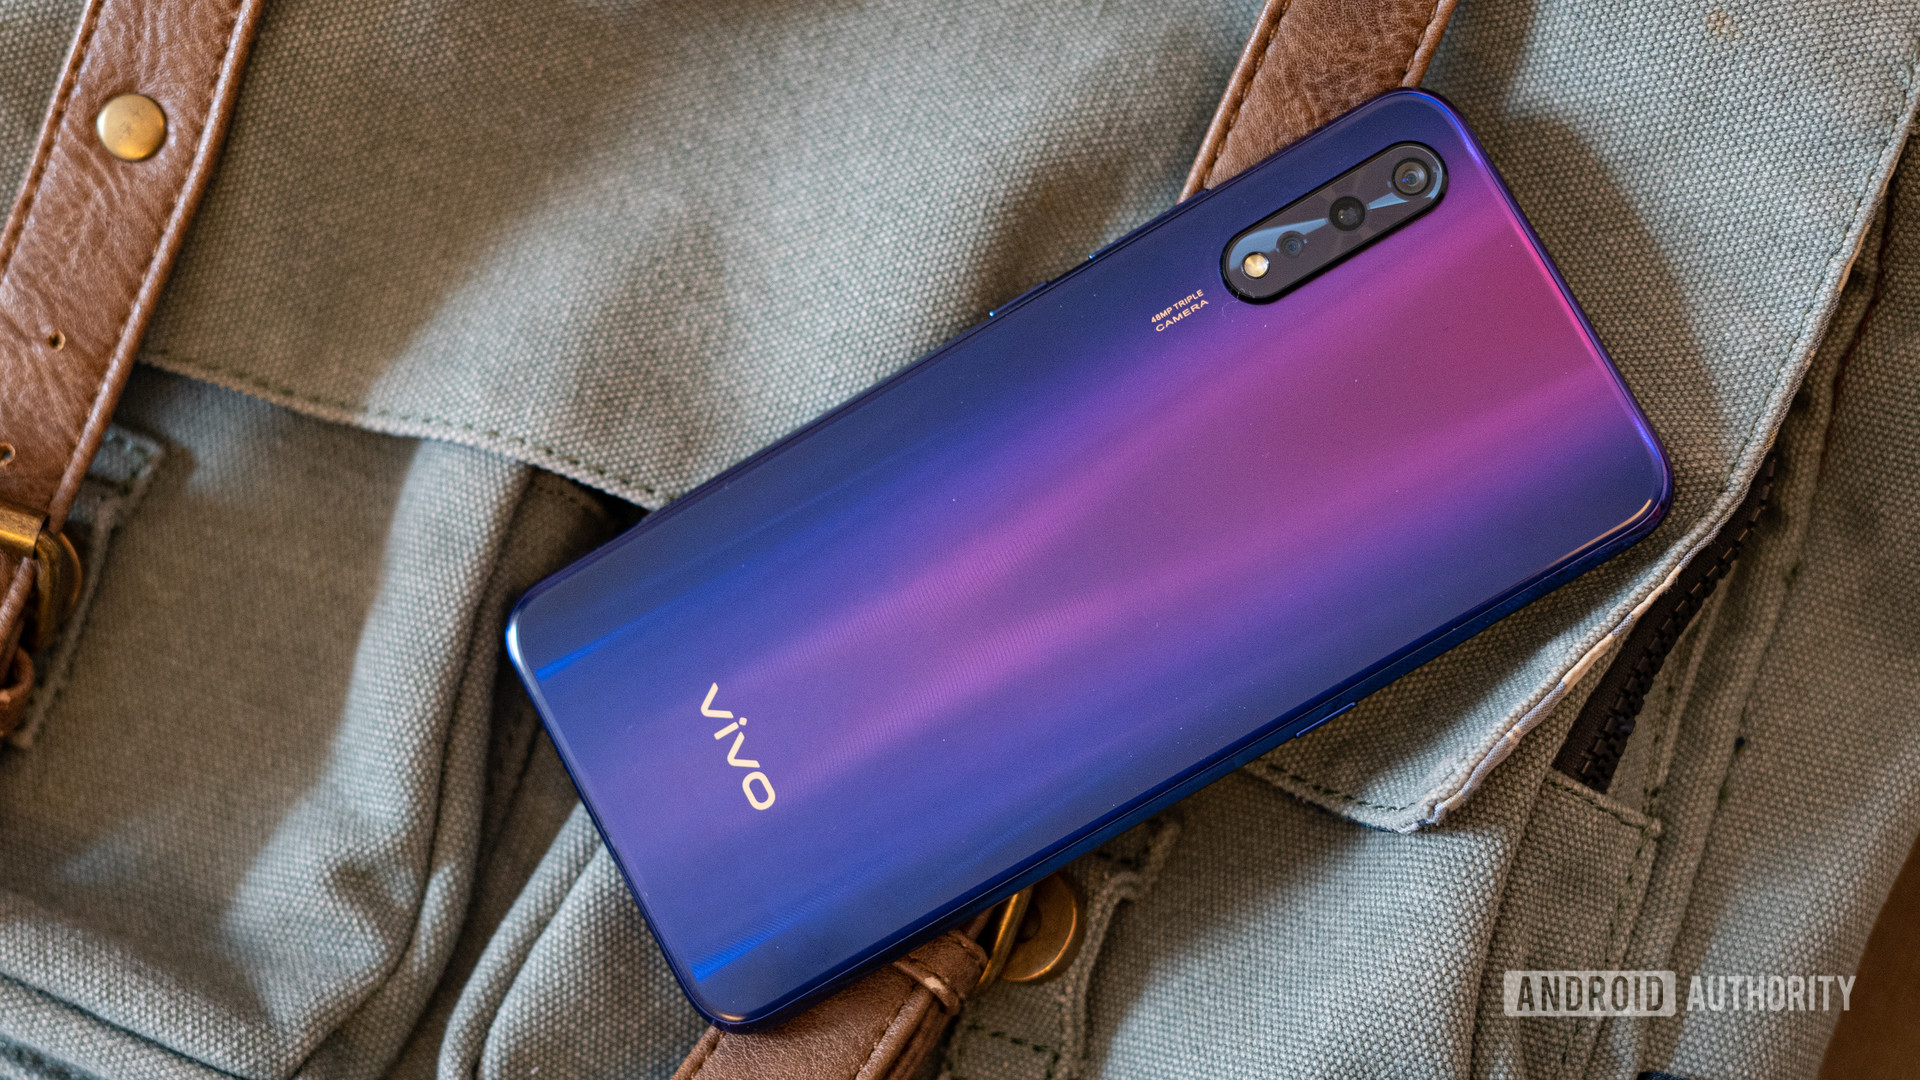 Vivo Z1x profile shot showing gradient and camera